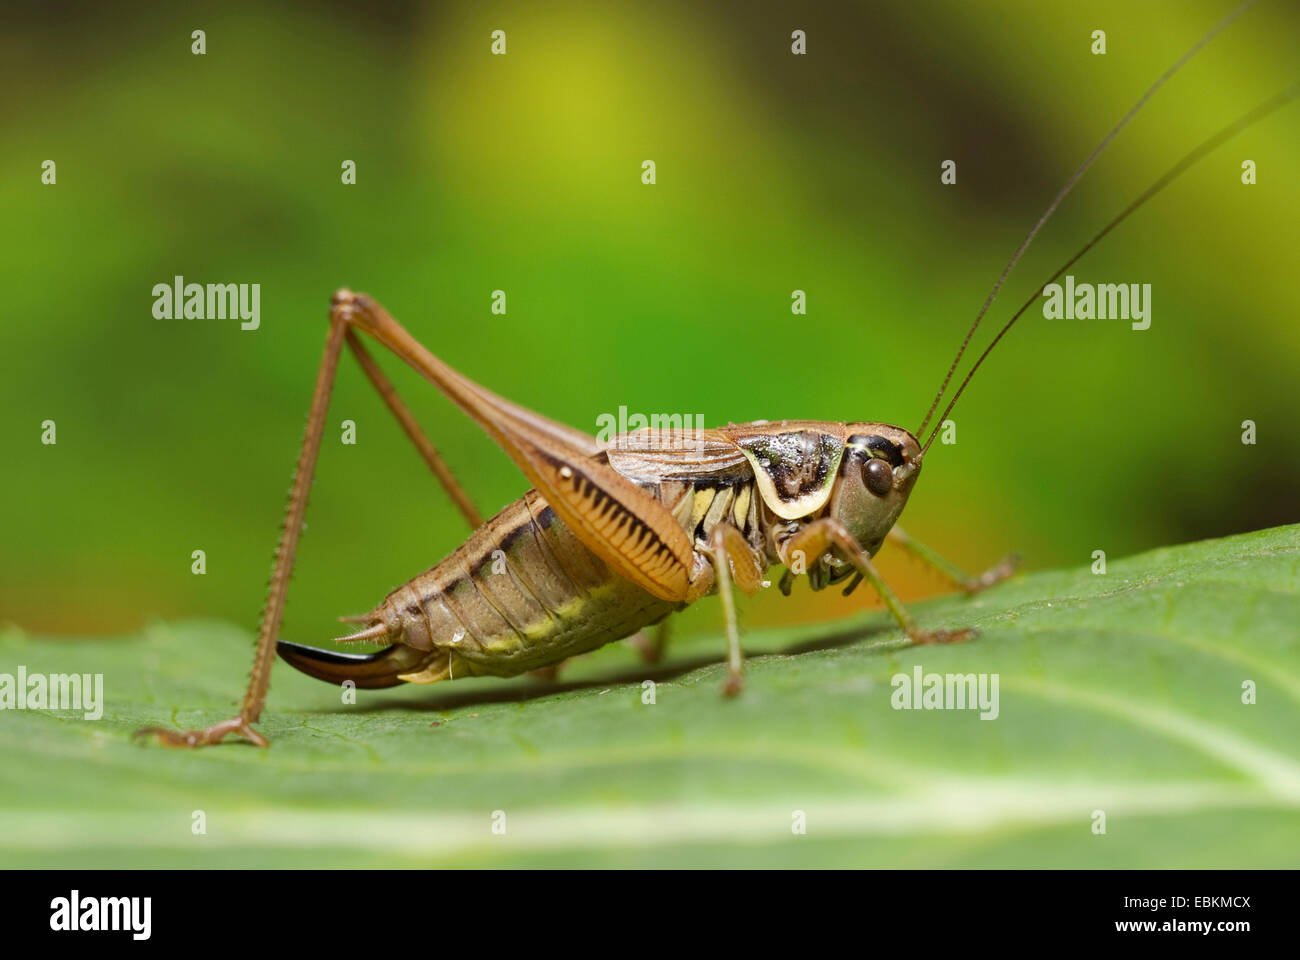 Roesel's Metrioptera roeselii (bushcricket), femme assise sur une feuille, Allemagne Banque D'Images